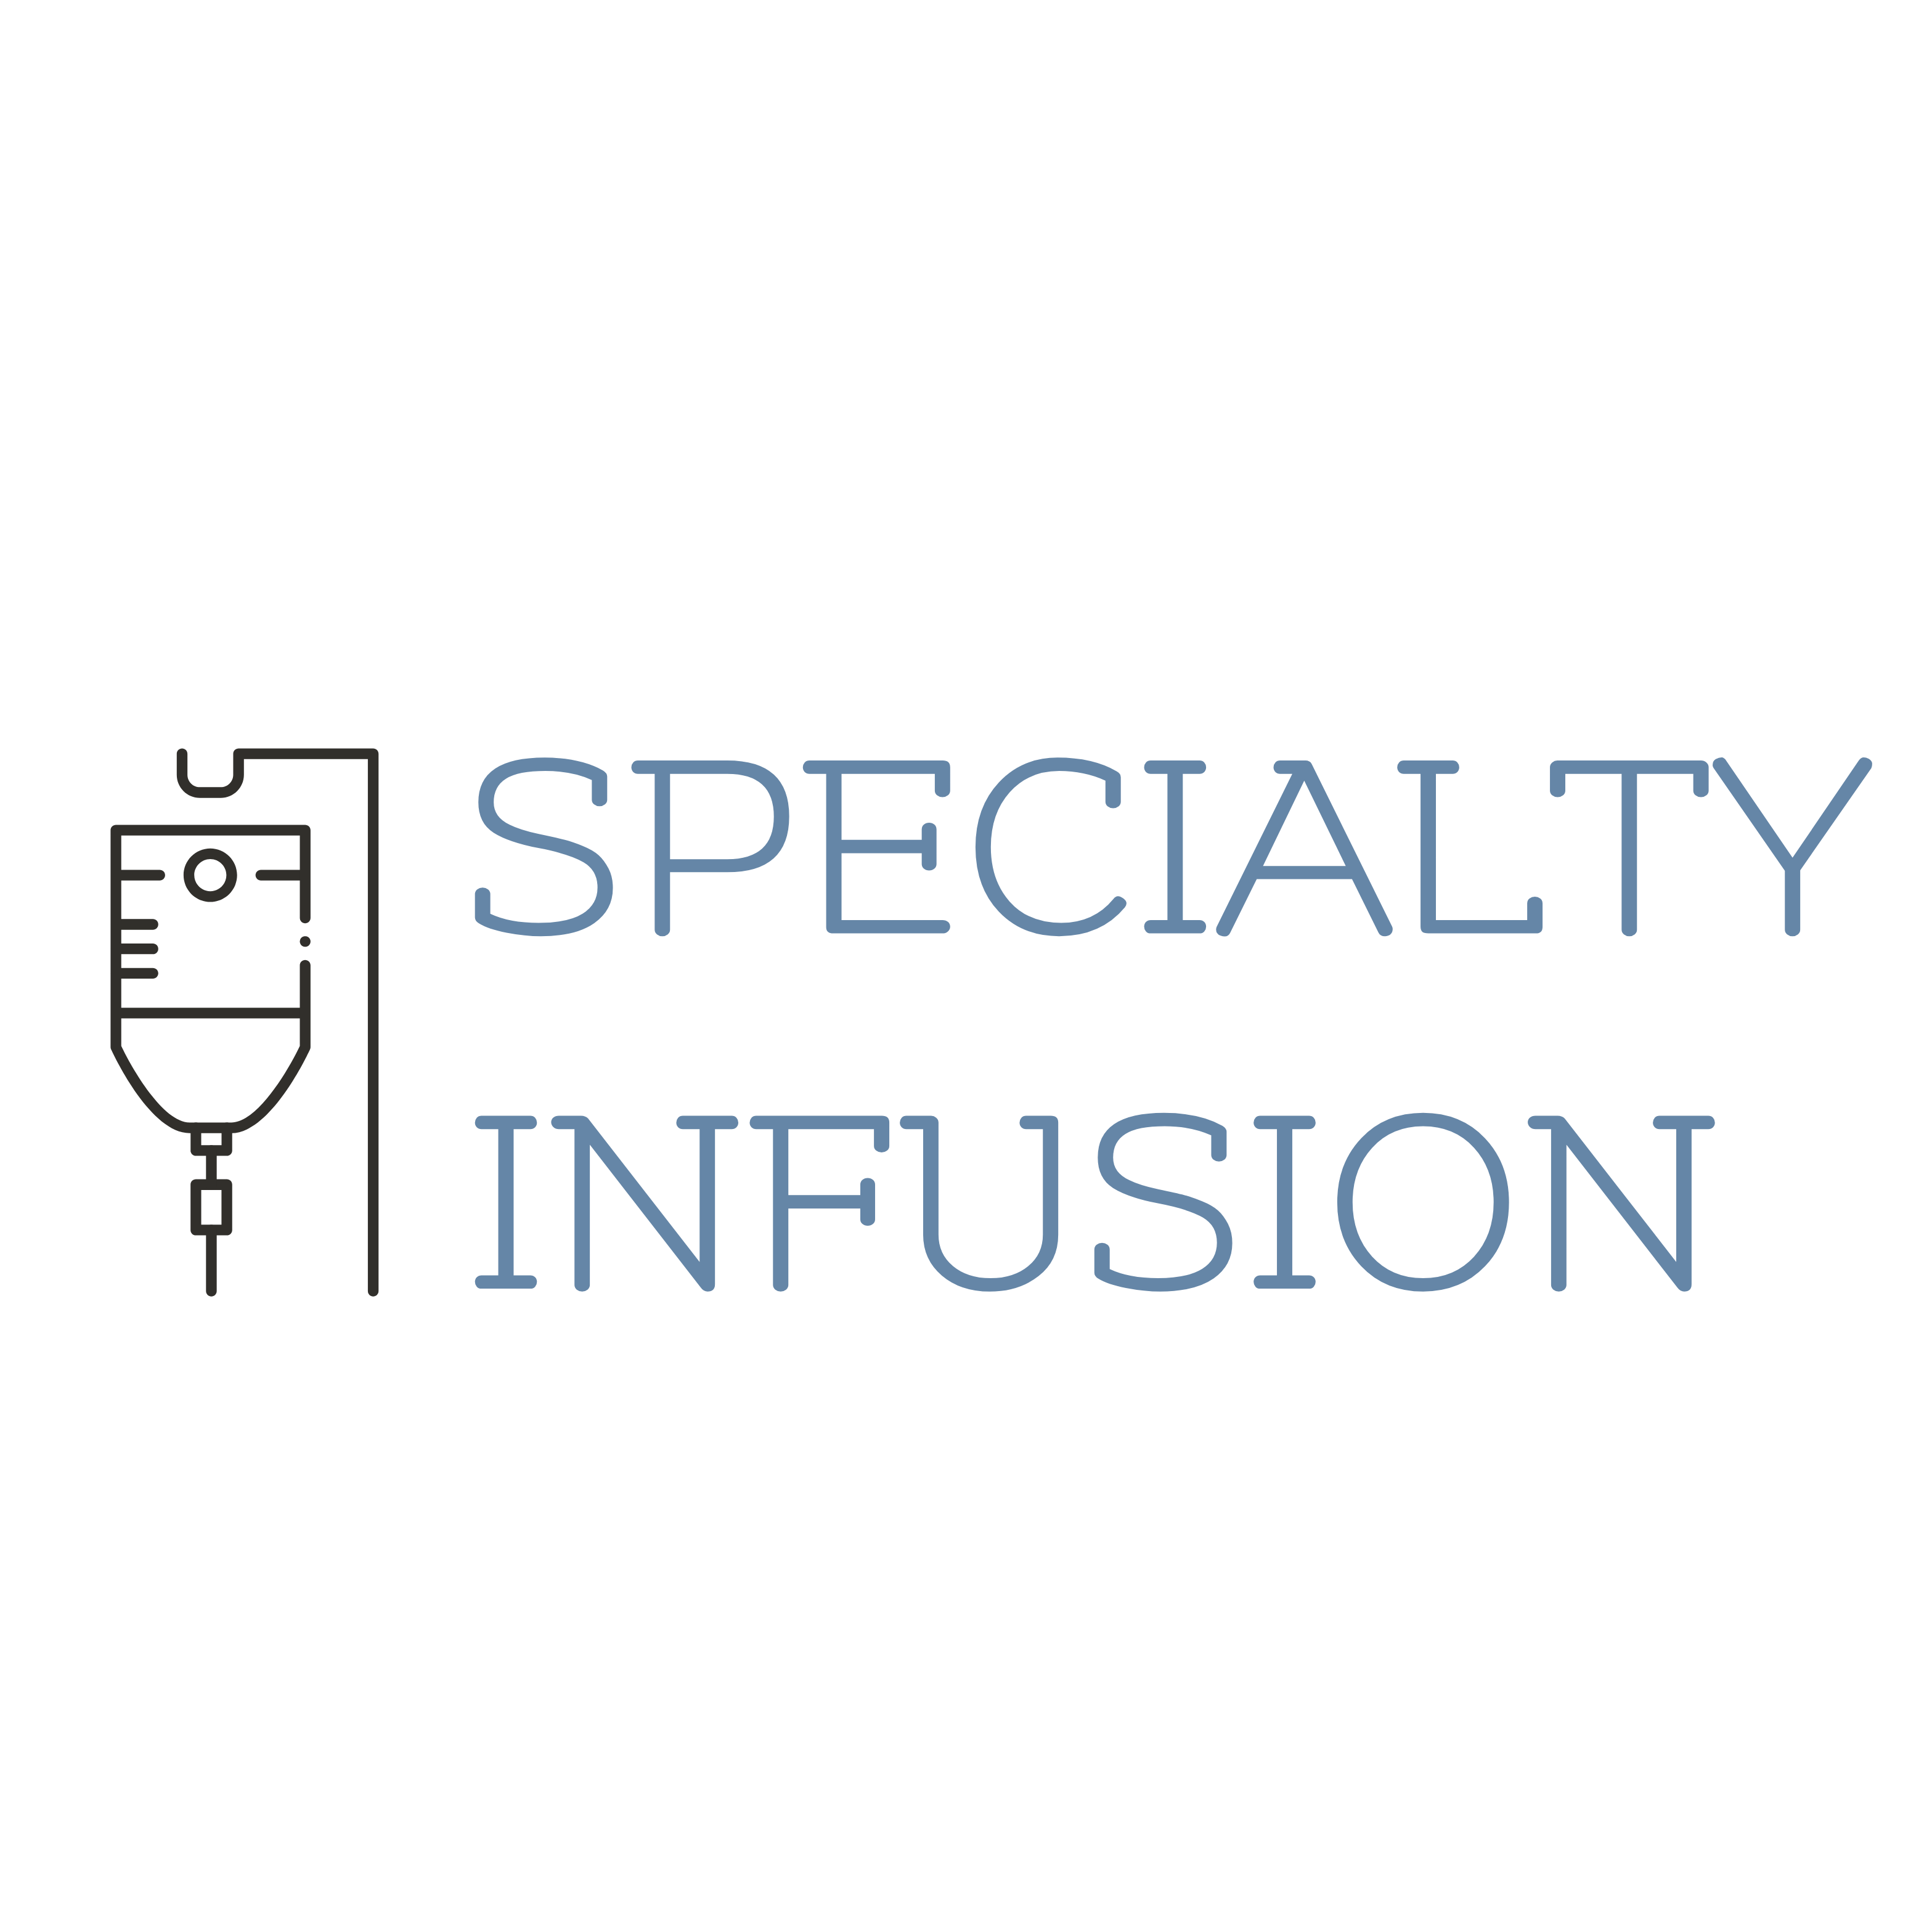 Specialty Infusion